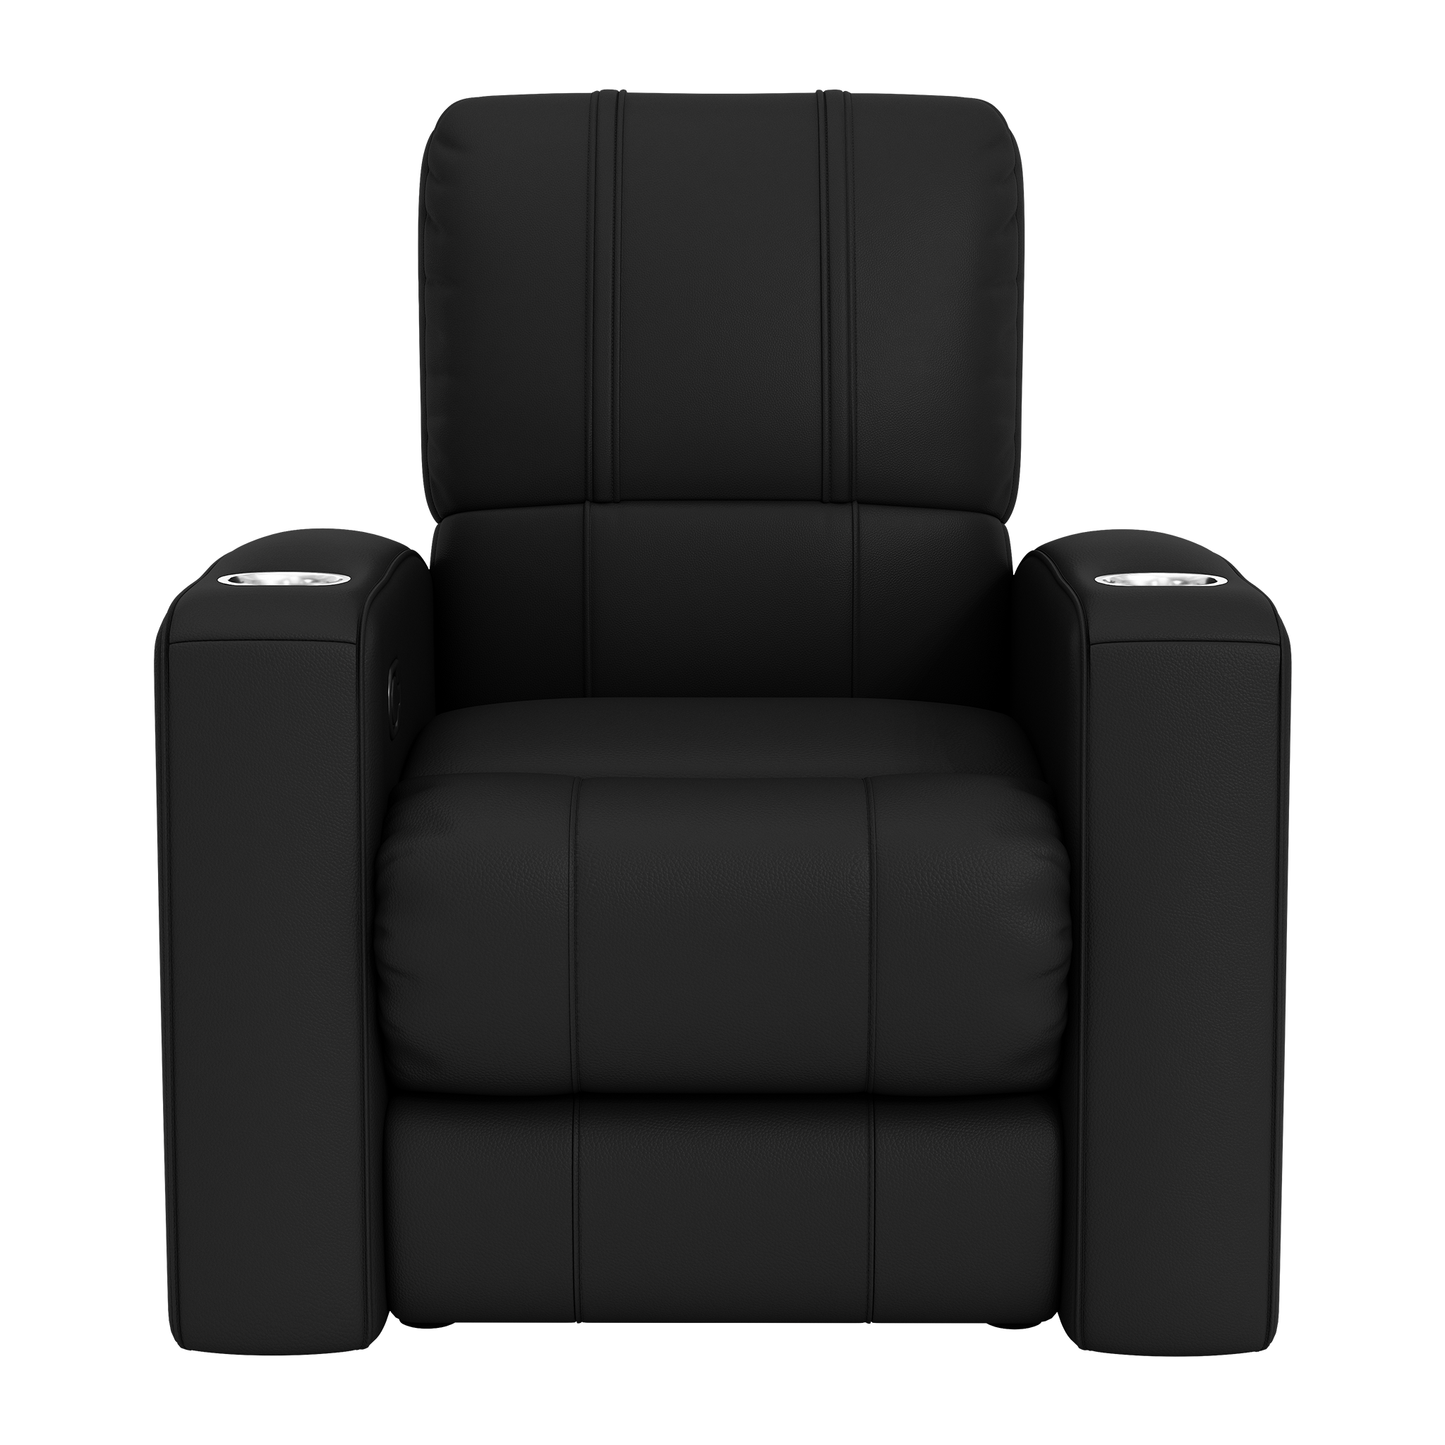 Relax Home Theater Recliner with Vancouver Canucks Logo